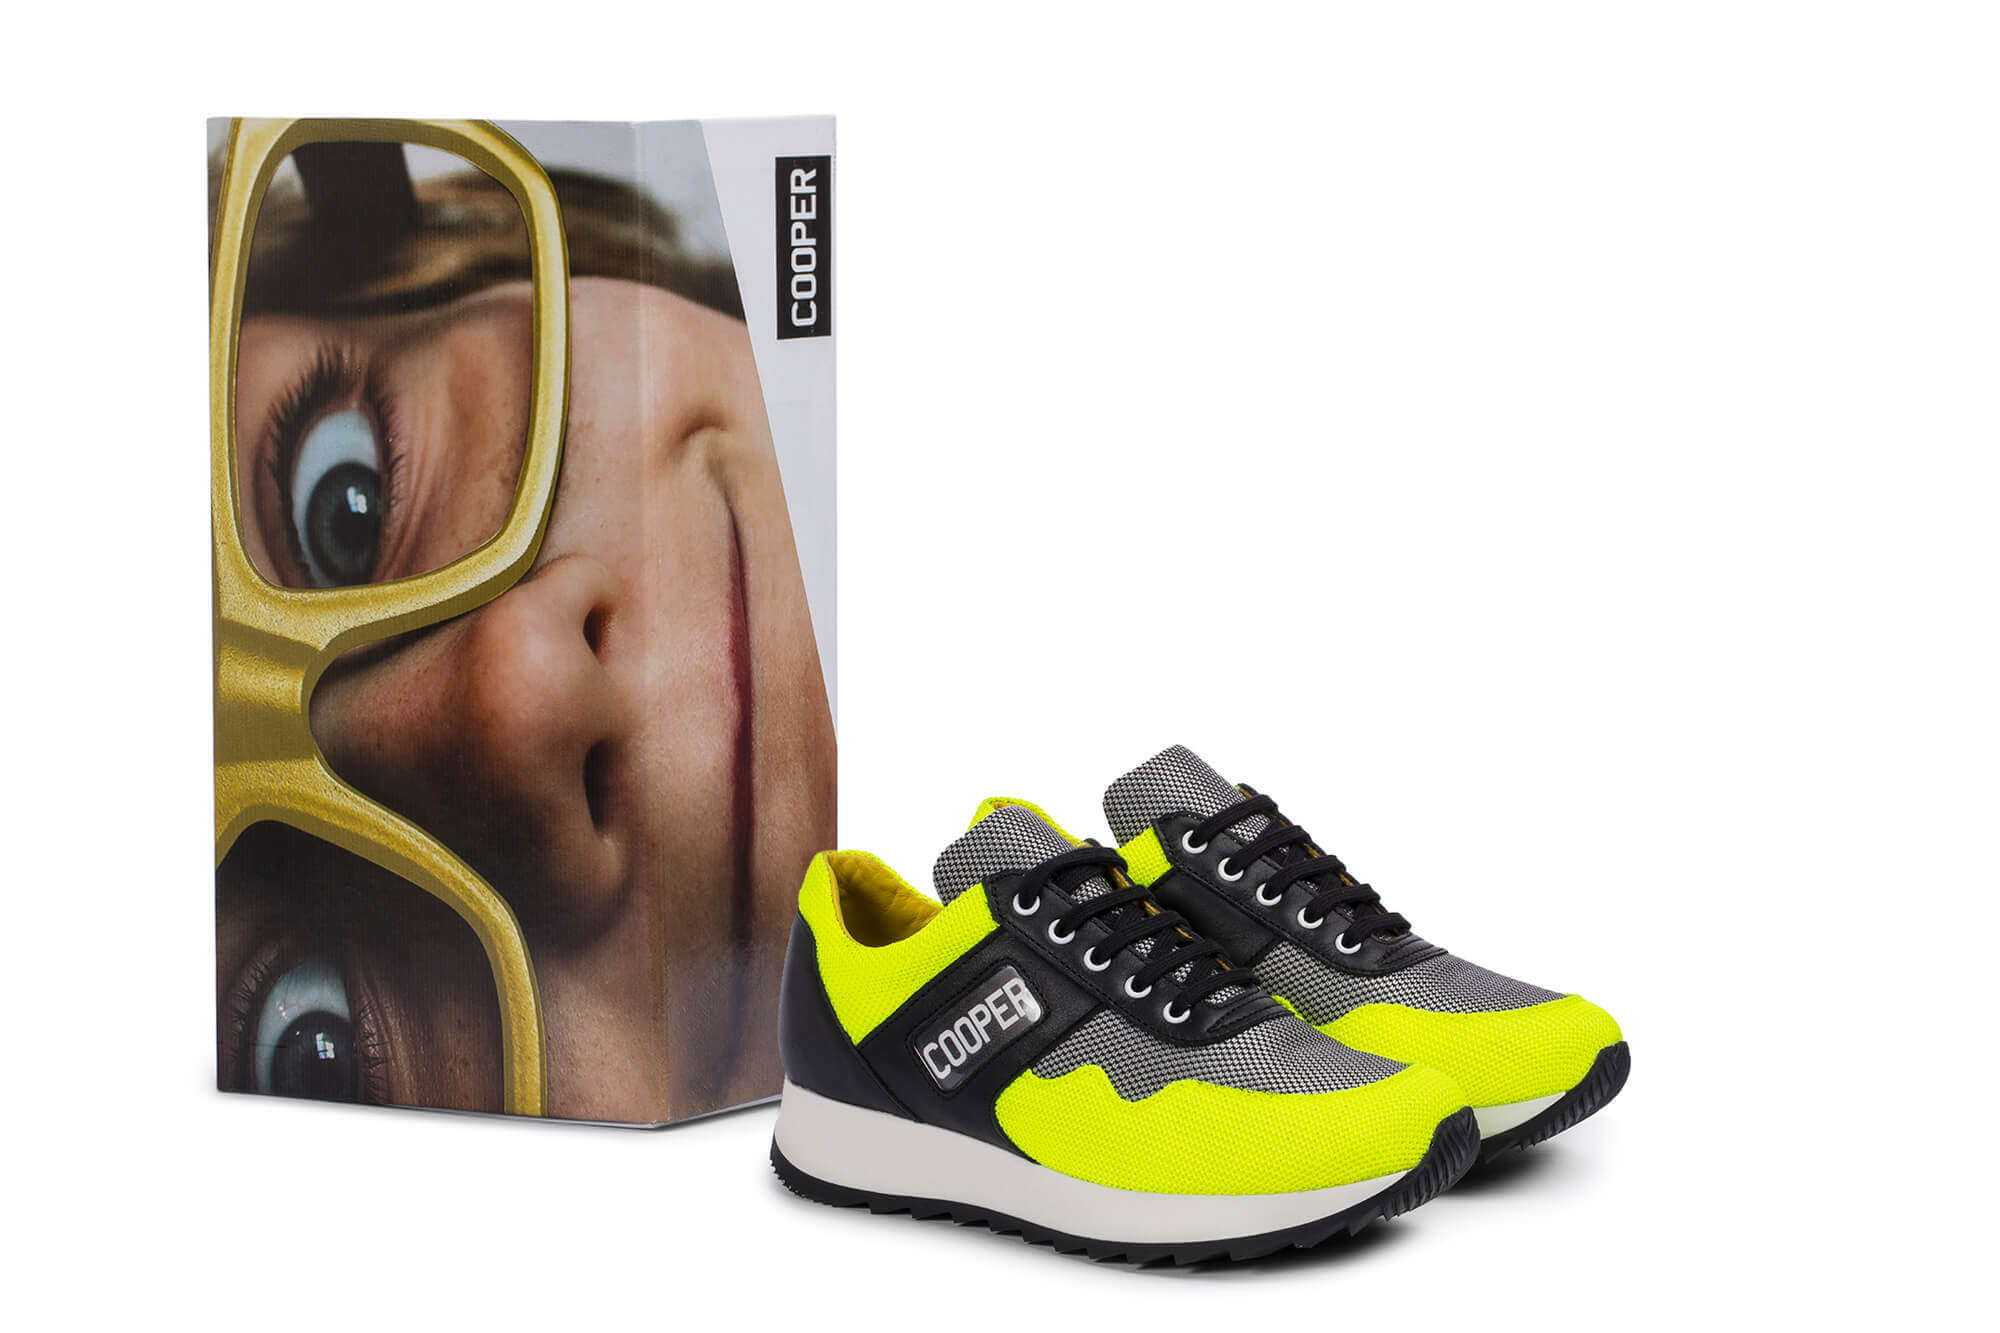 TOPKIDS customized made in Italy sneakers by James Barry